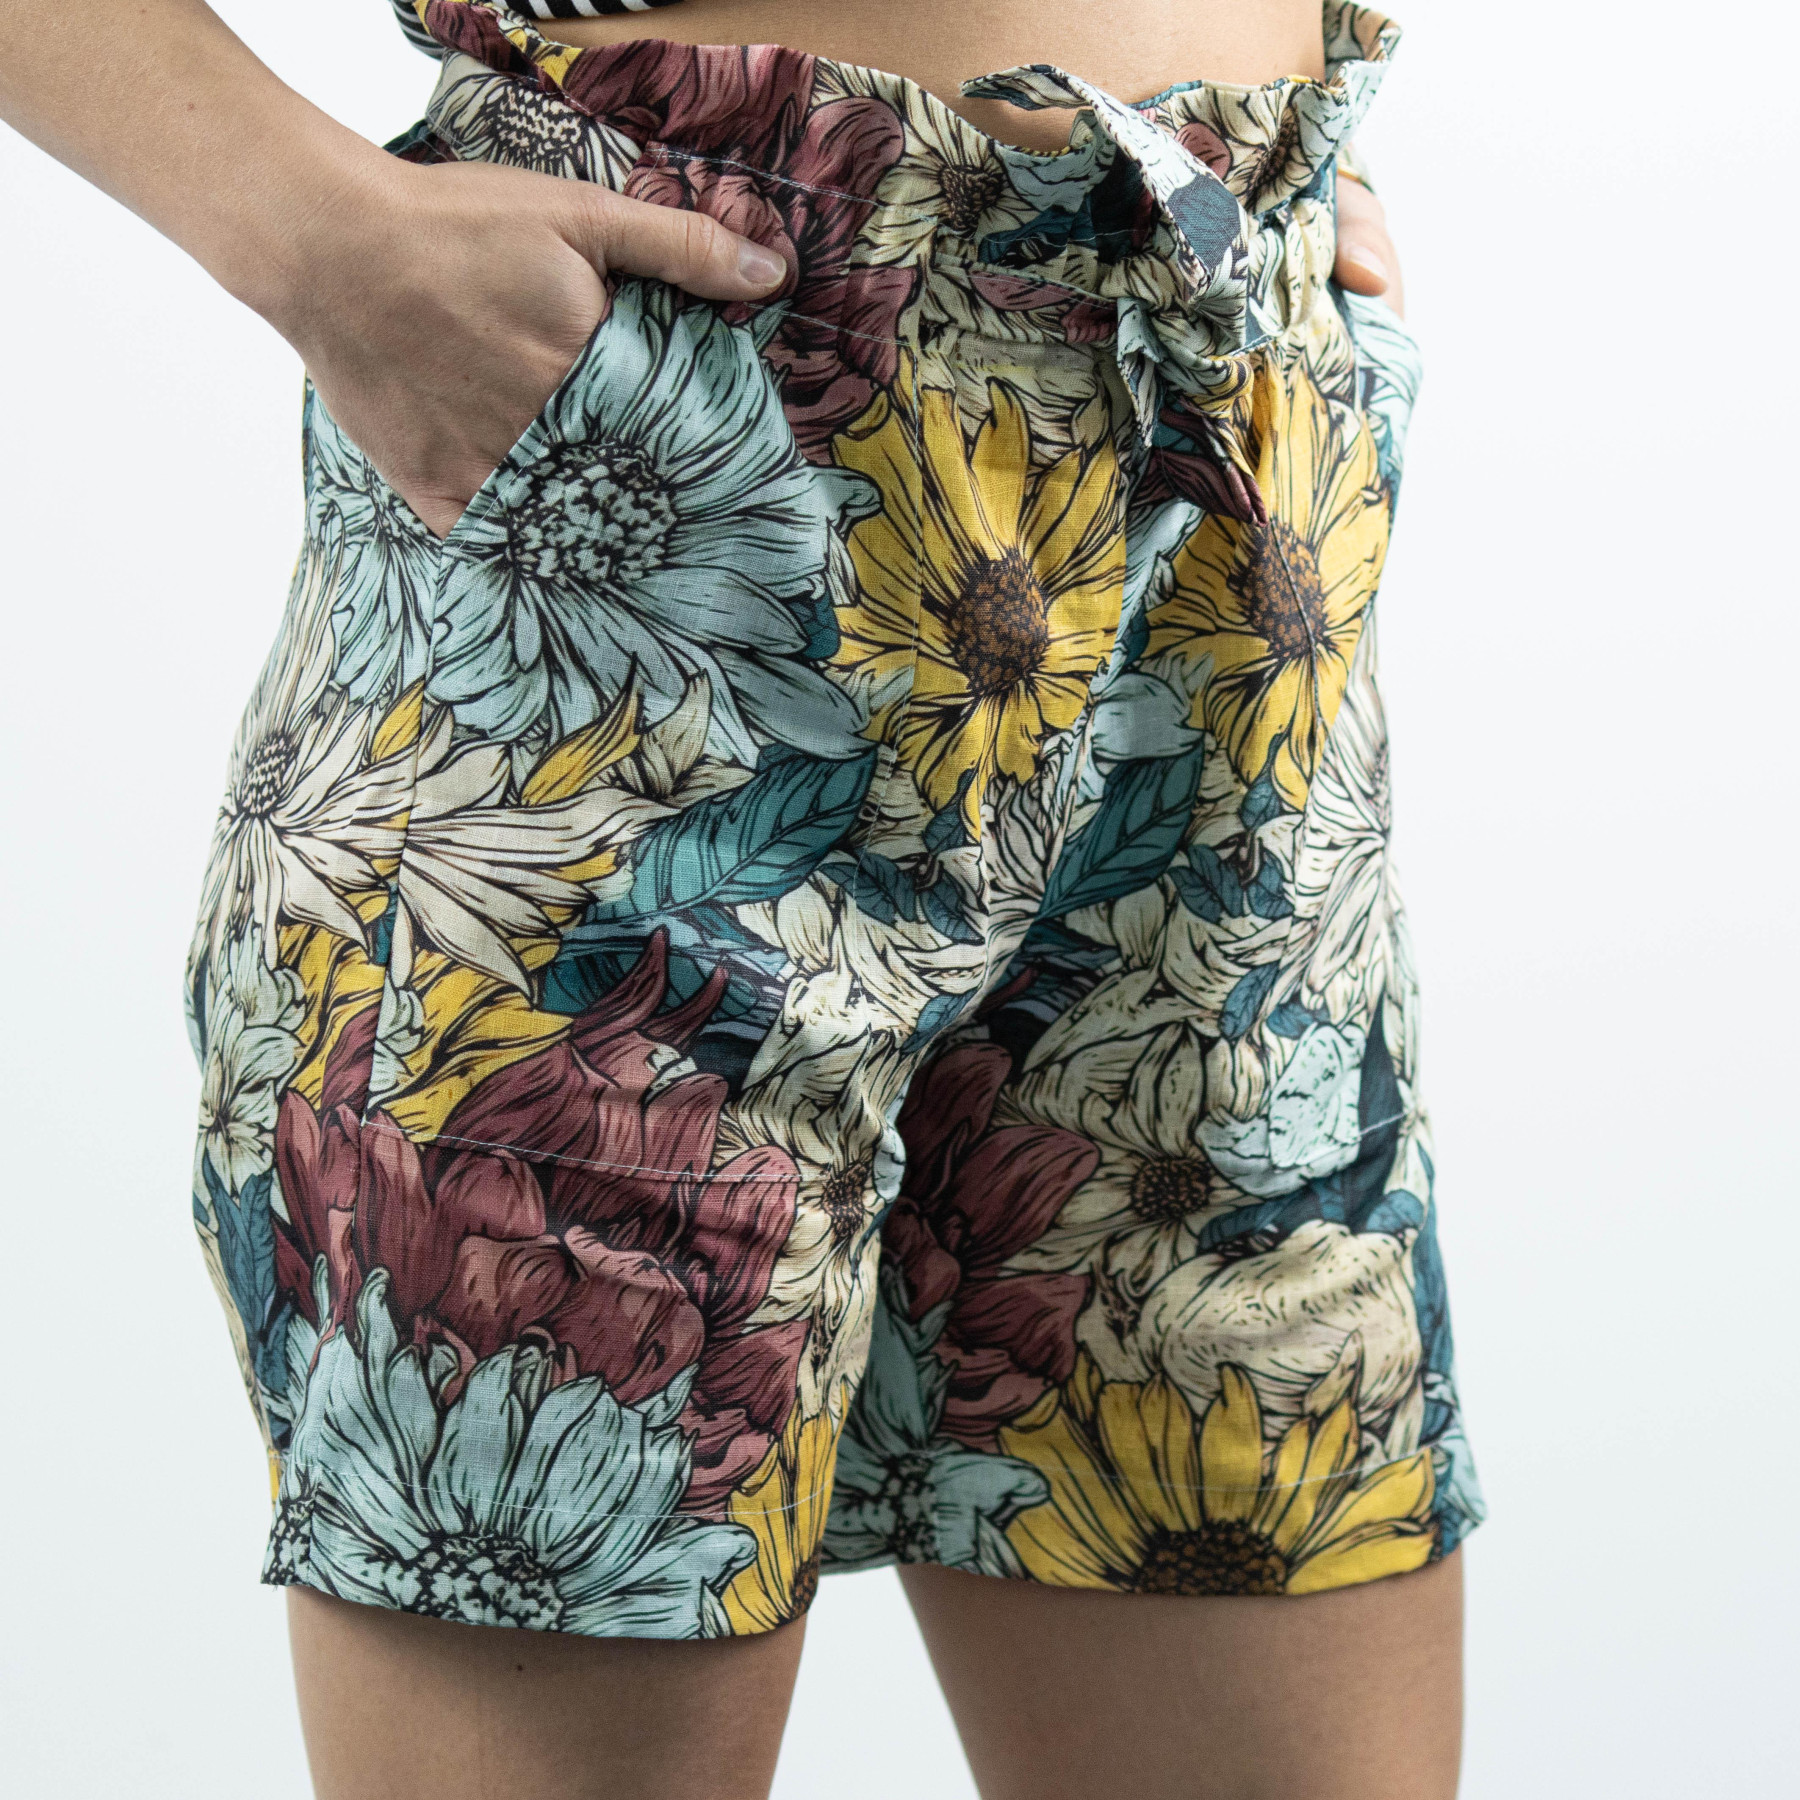 PAPERBAG SHORTS - LUXE TROPICAL pat. 2 - sewing set